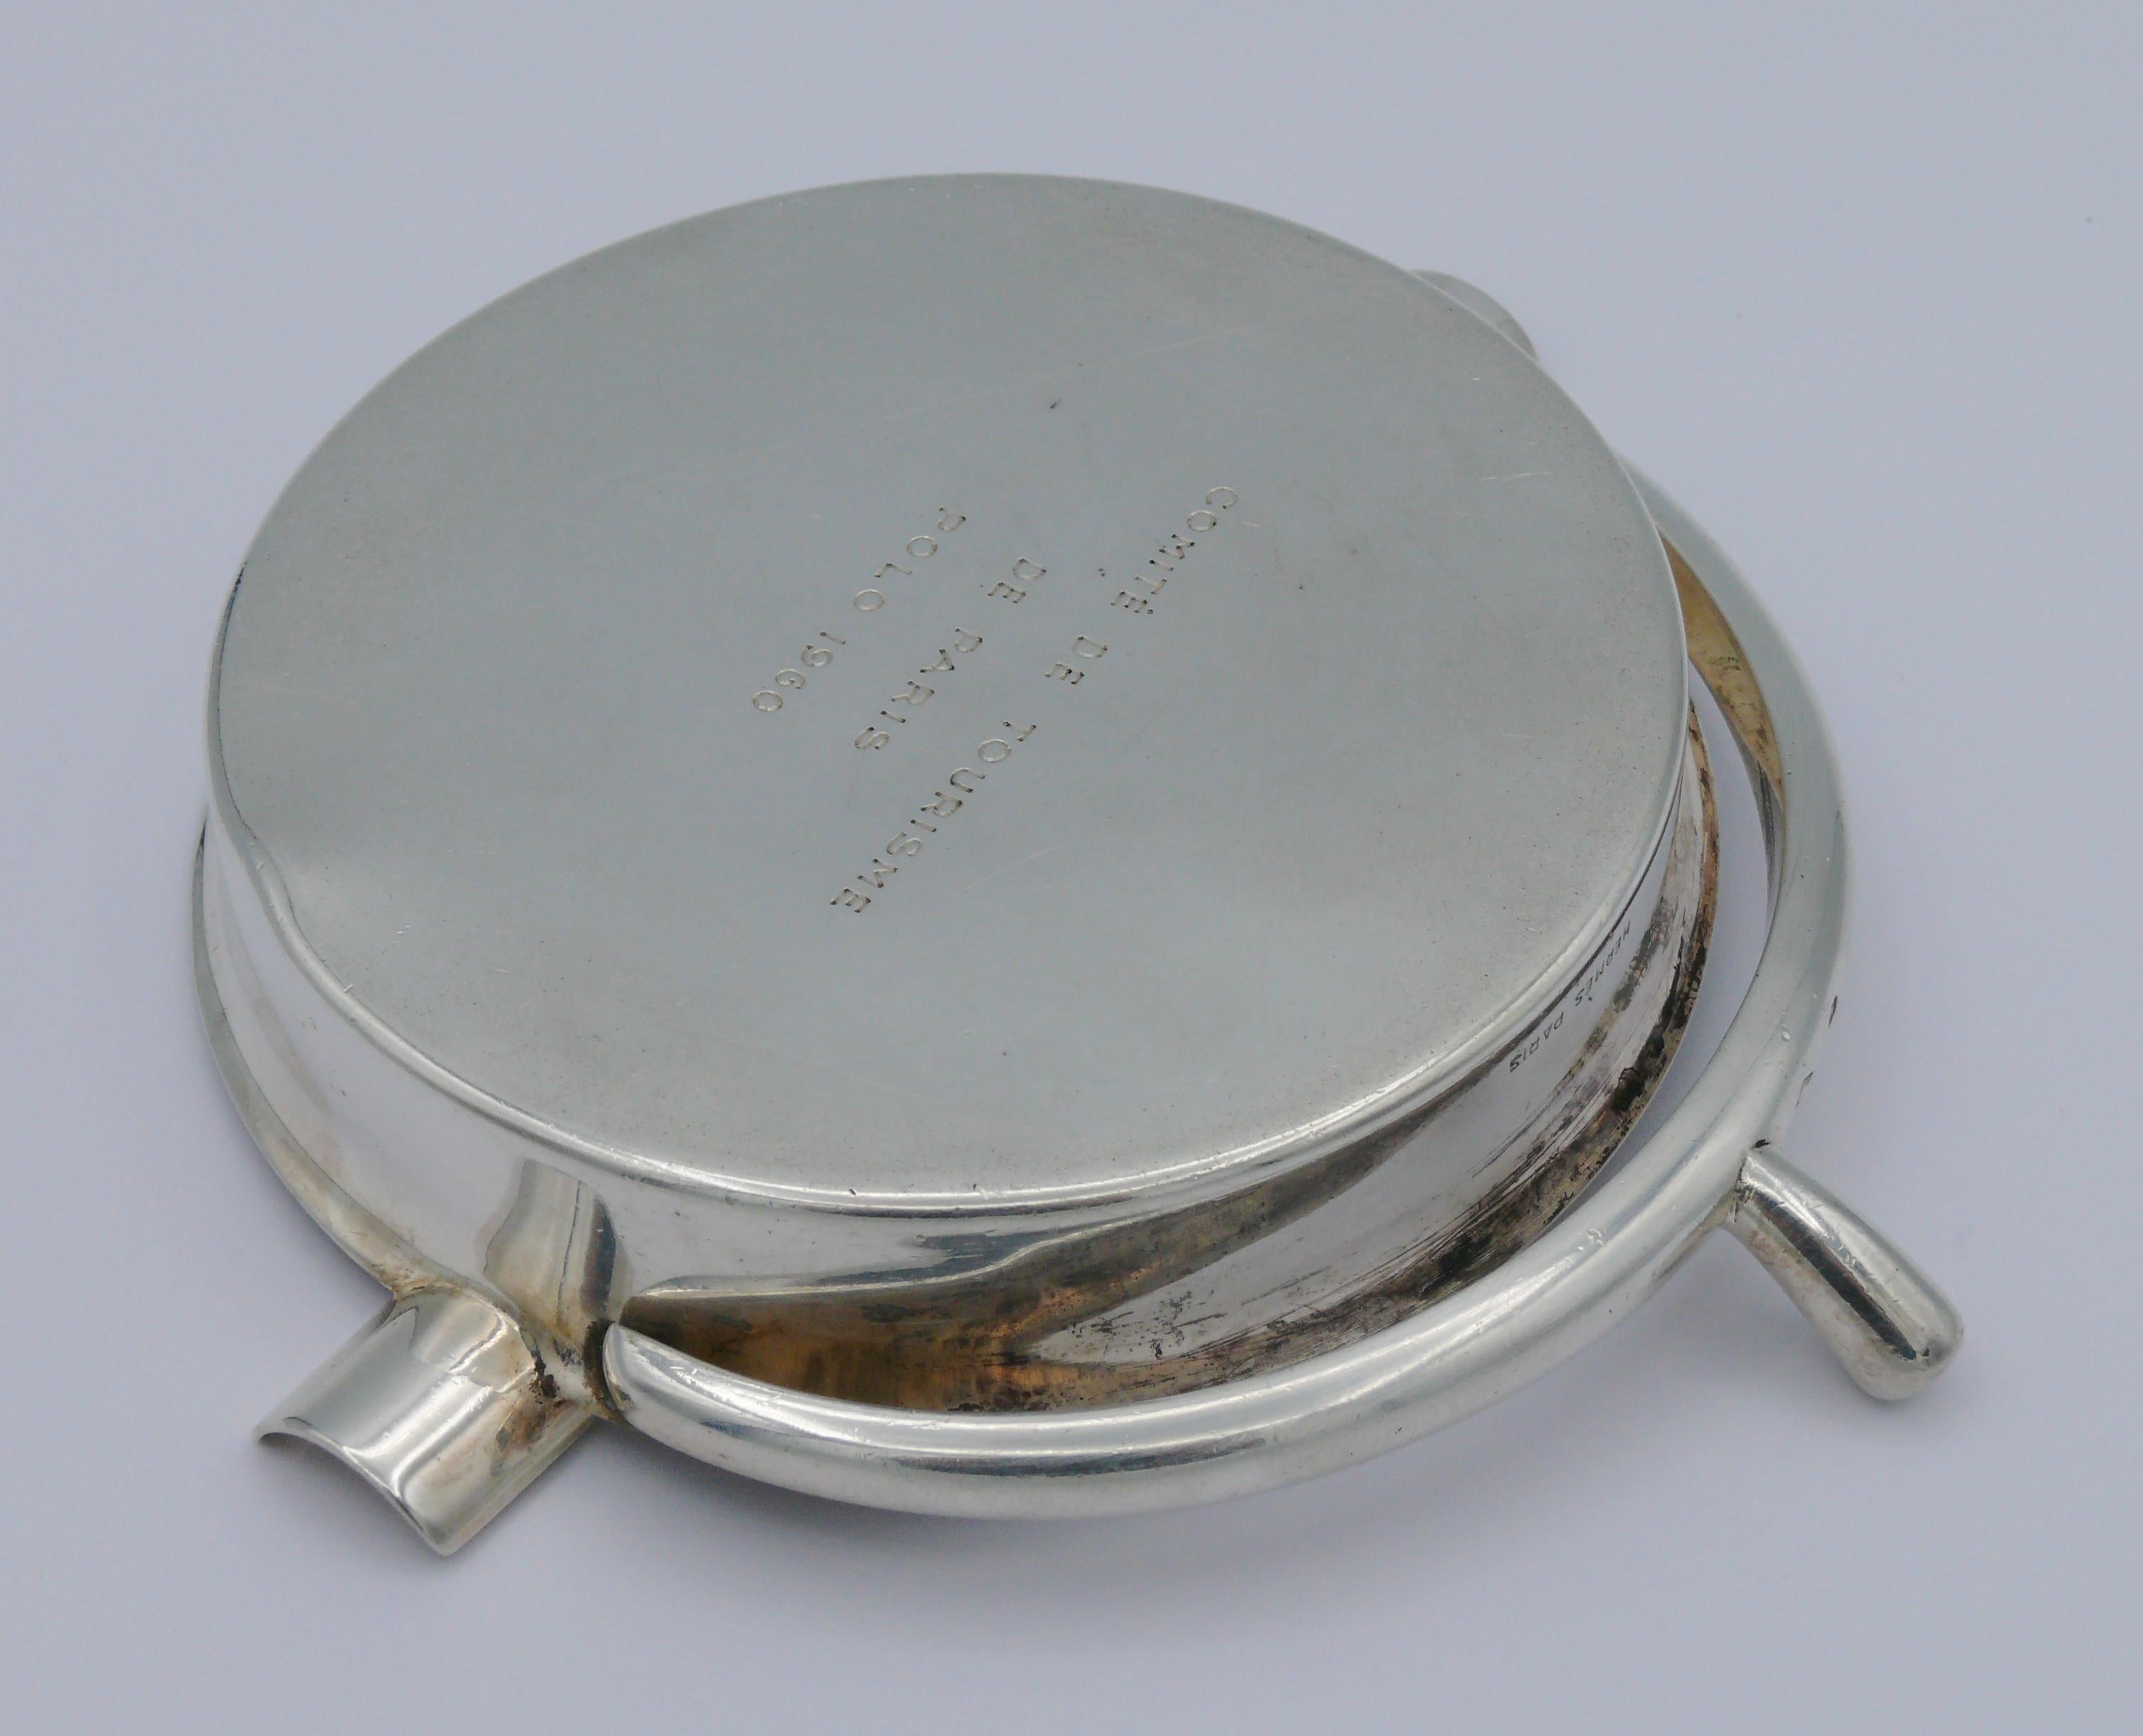 HERMES Vintage Solid Silver Guilloche Stirrup Ashtray For Sale 5